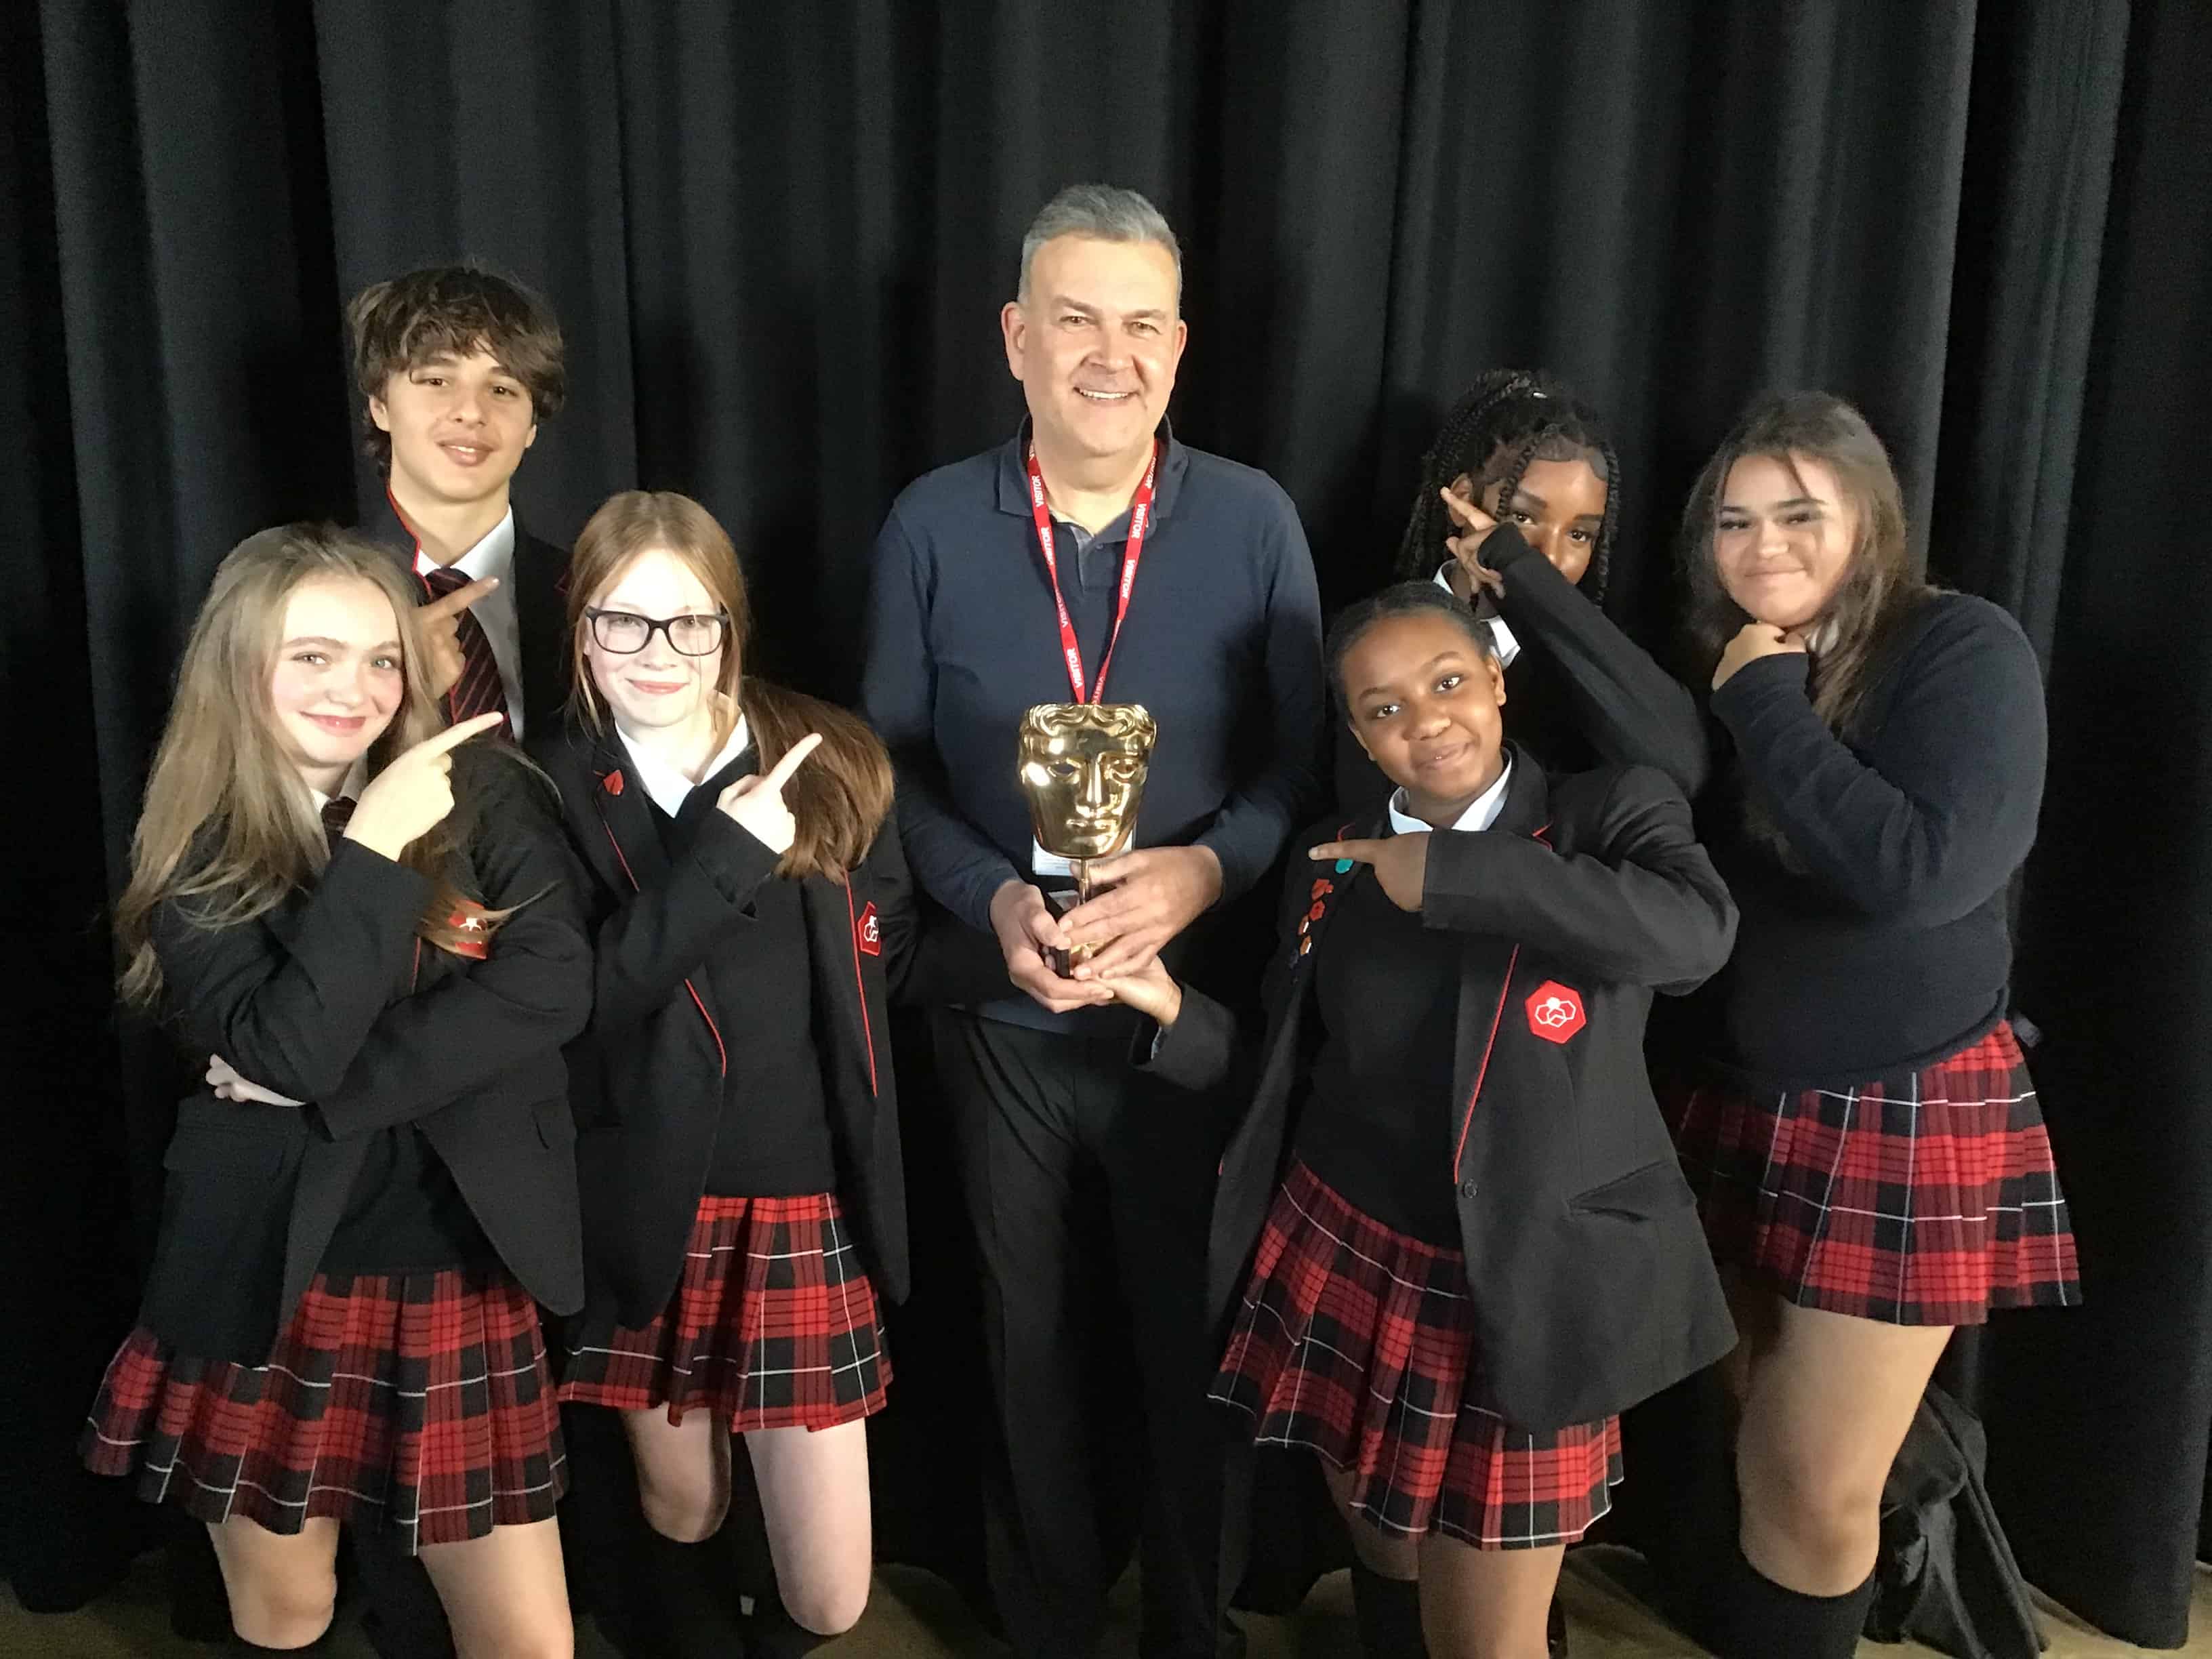 6 students from Didsbury High School pose with Phil Mealey and his BAFTA award.